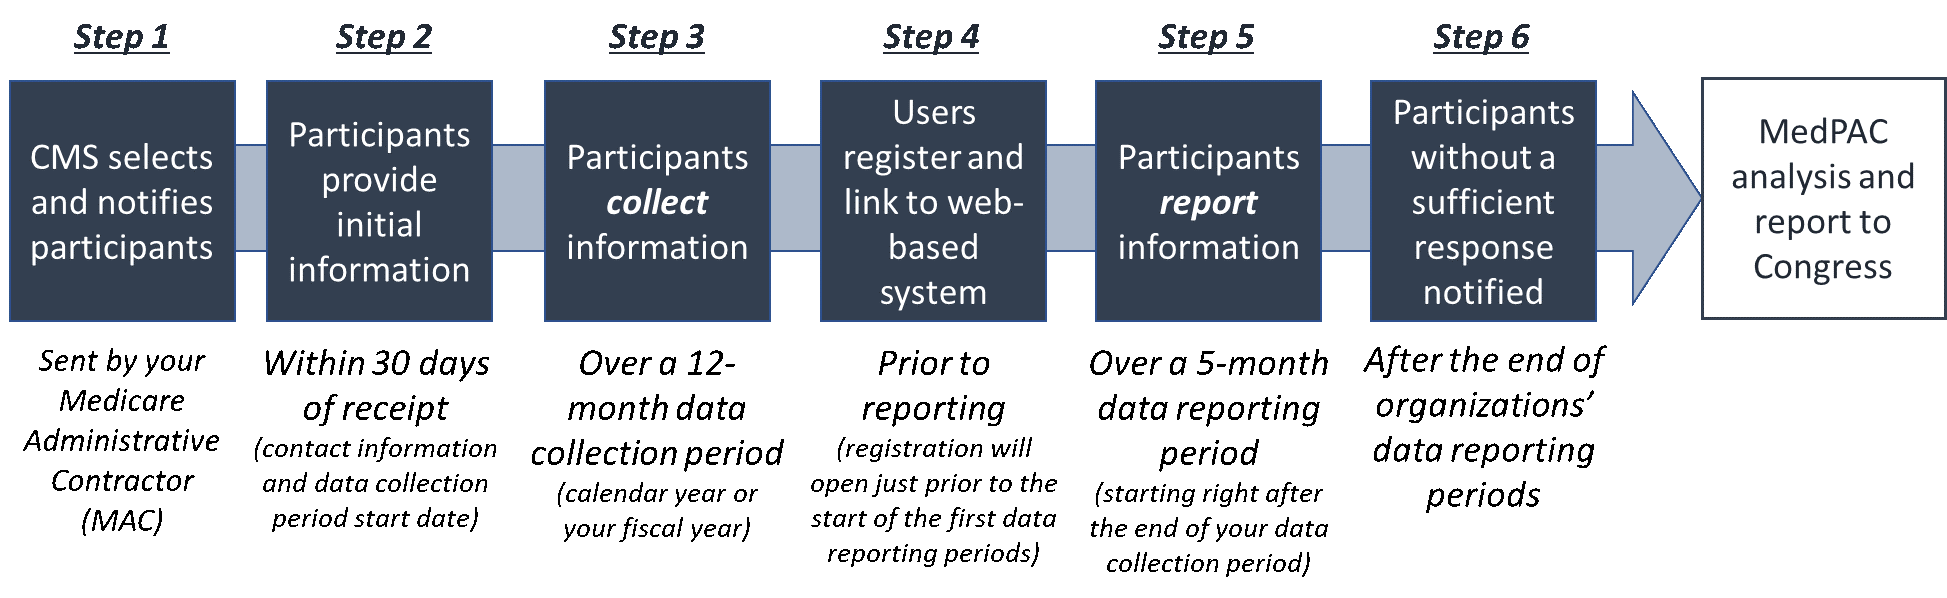 Overview of the Timeline for the Data Collection & Data Reporting Requirements under the GADCS